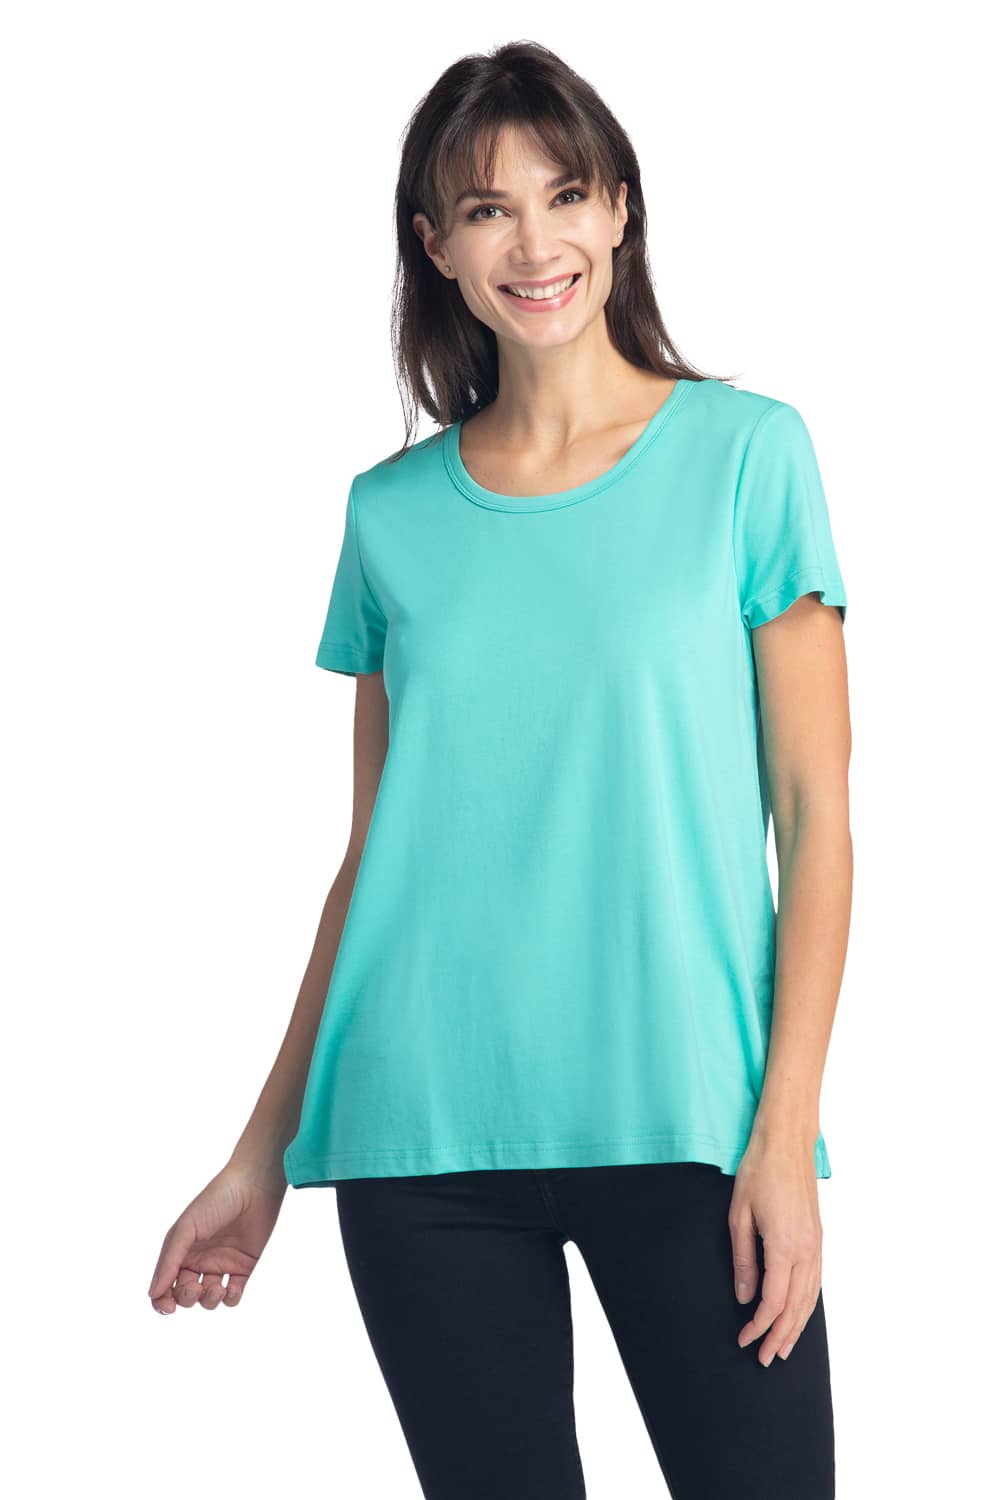 Women's Relaxed EcoFabric™ Scoop Neck Tee Womens>Casual>Top Fishers Finery Turquoise X-Small 